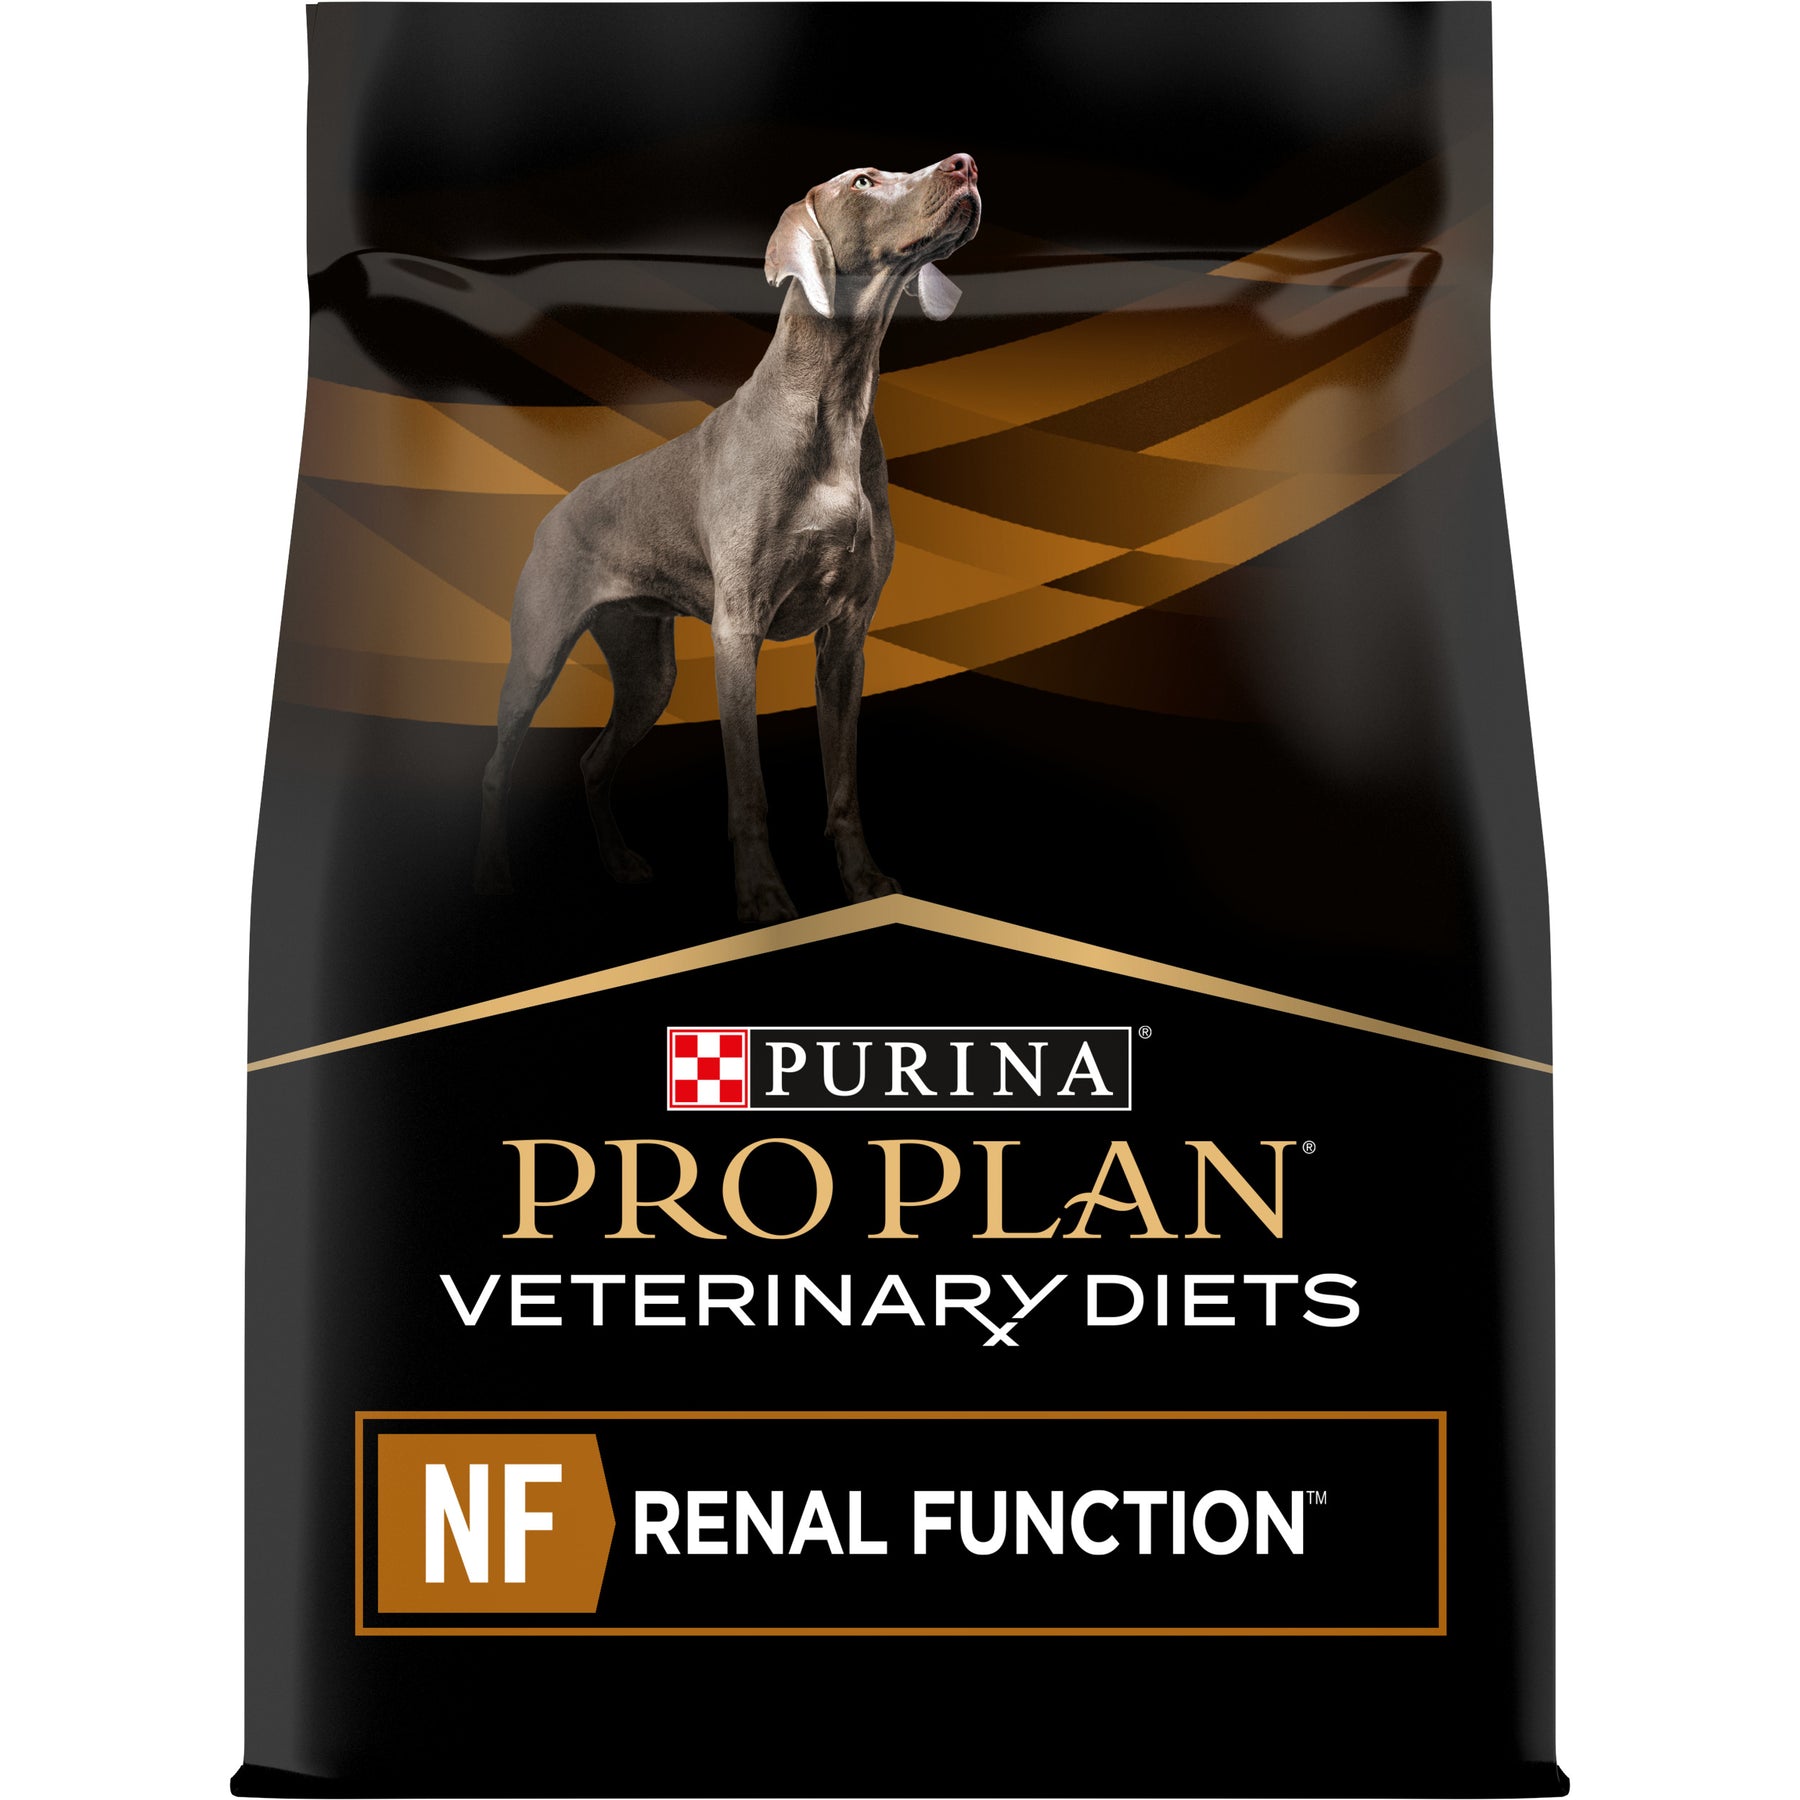 PURINA® PRO PLAN® Veterinary Diets - Canine NF Renal Function